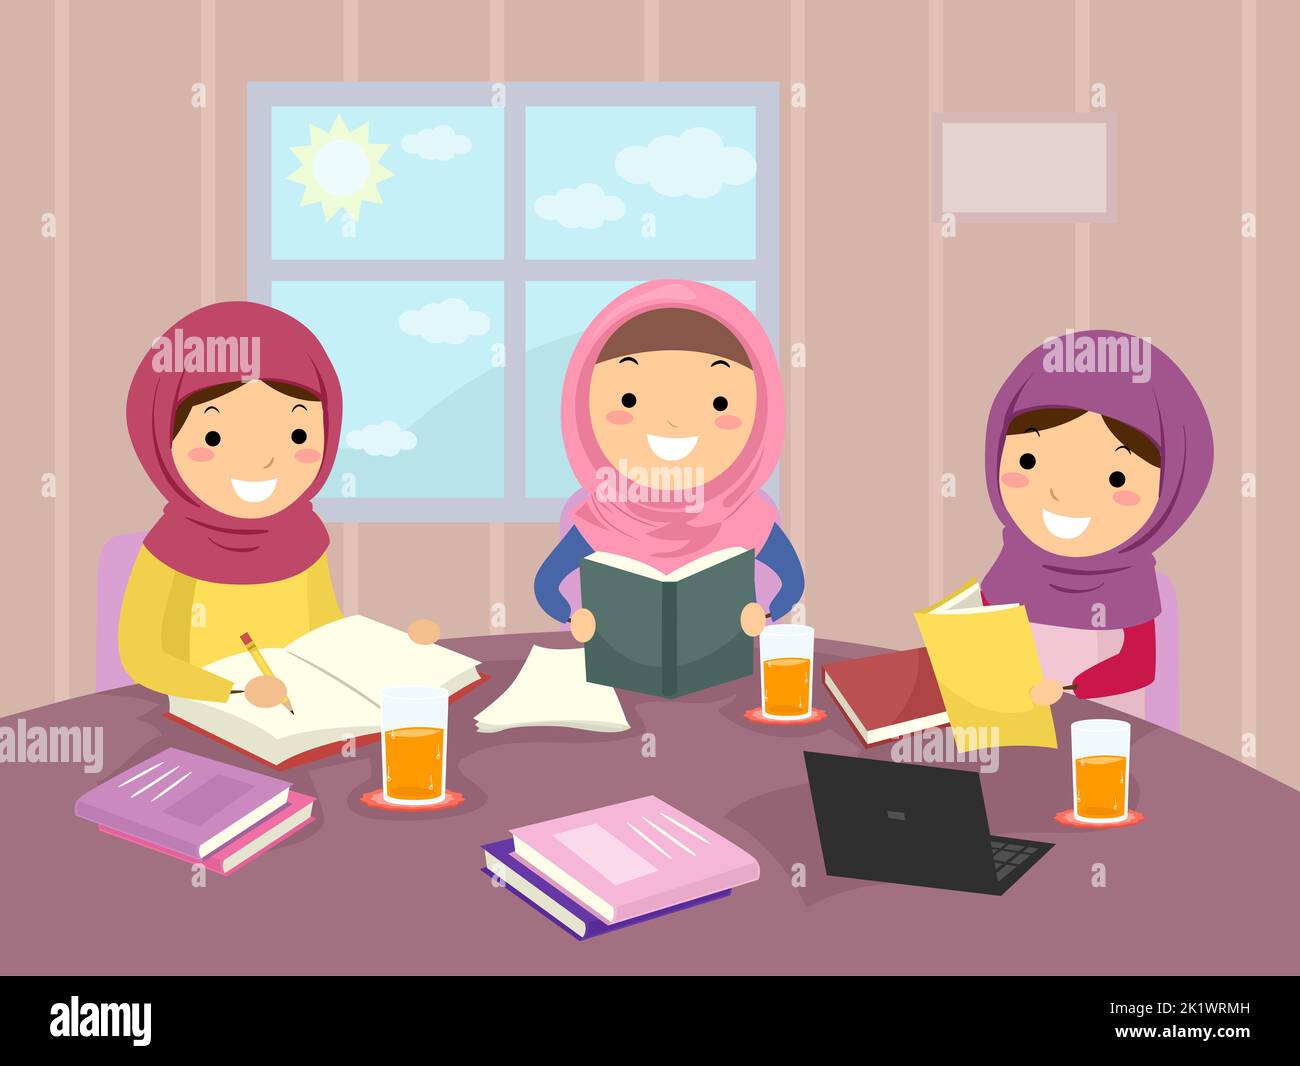 Illustration of Stickman Muslim Kids Girls Wearing Hijab and Studying as Group with Books and Notes on the Table Stock Photo